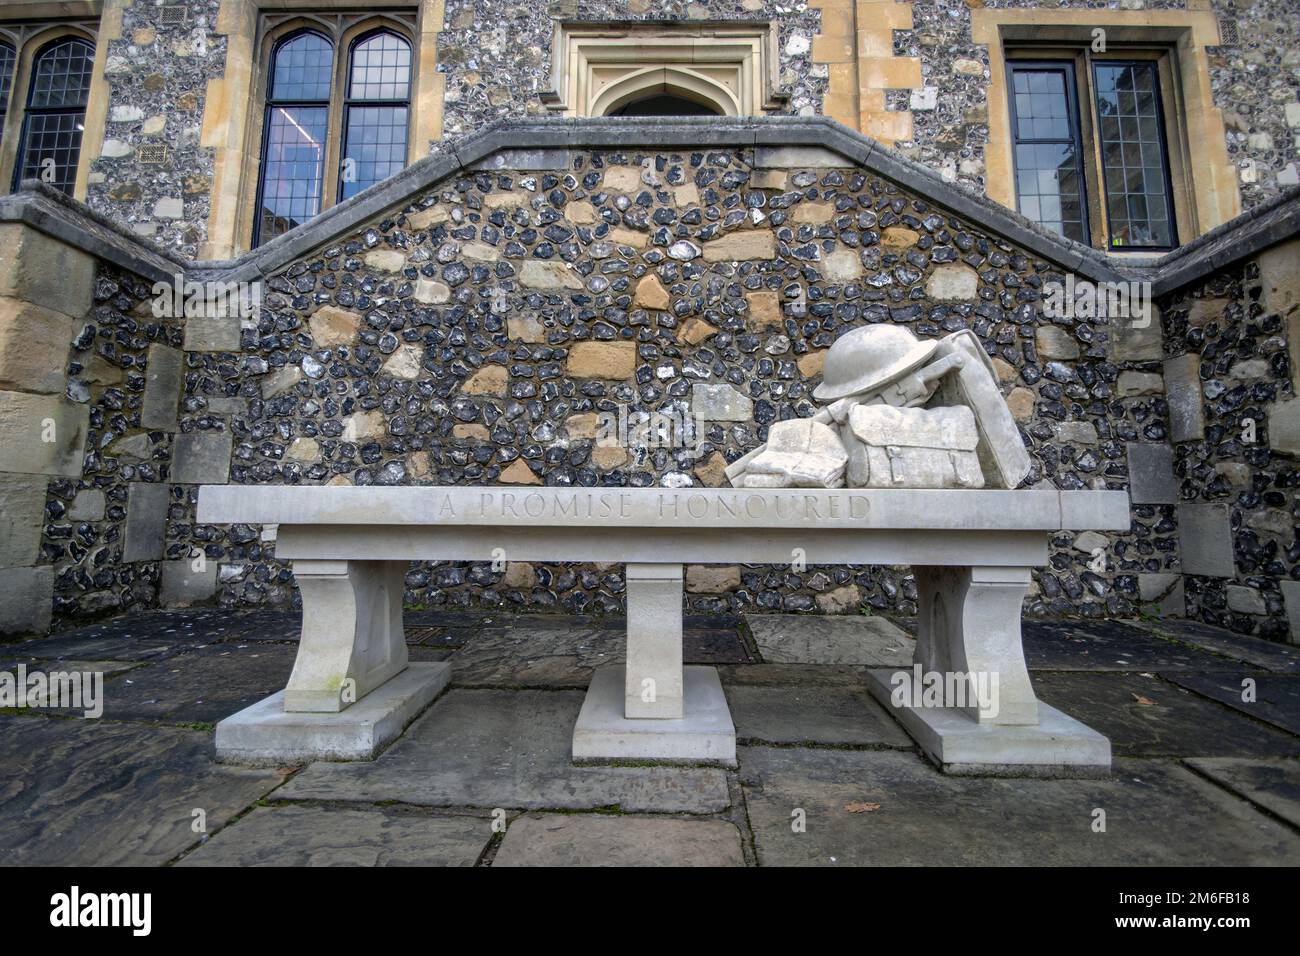 The stone memorial 'A Promise Honoured' outside the Great Hall in Winchester, Hampshire, UK Stock Photo